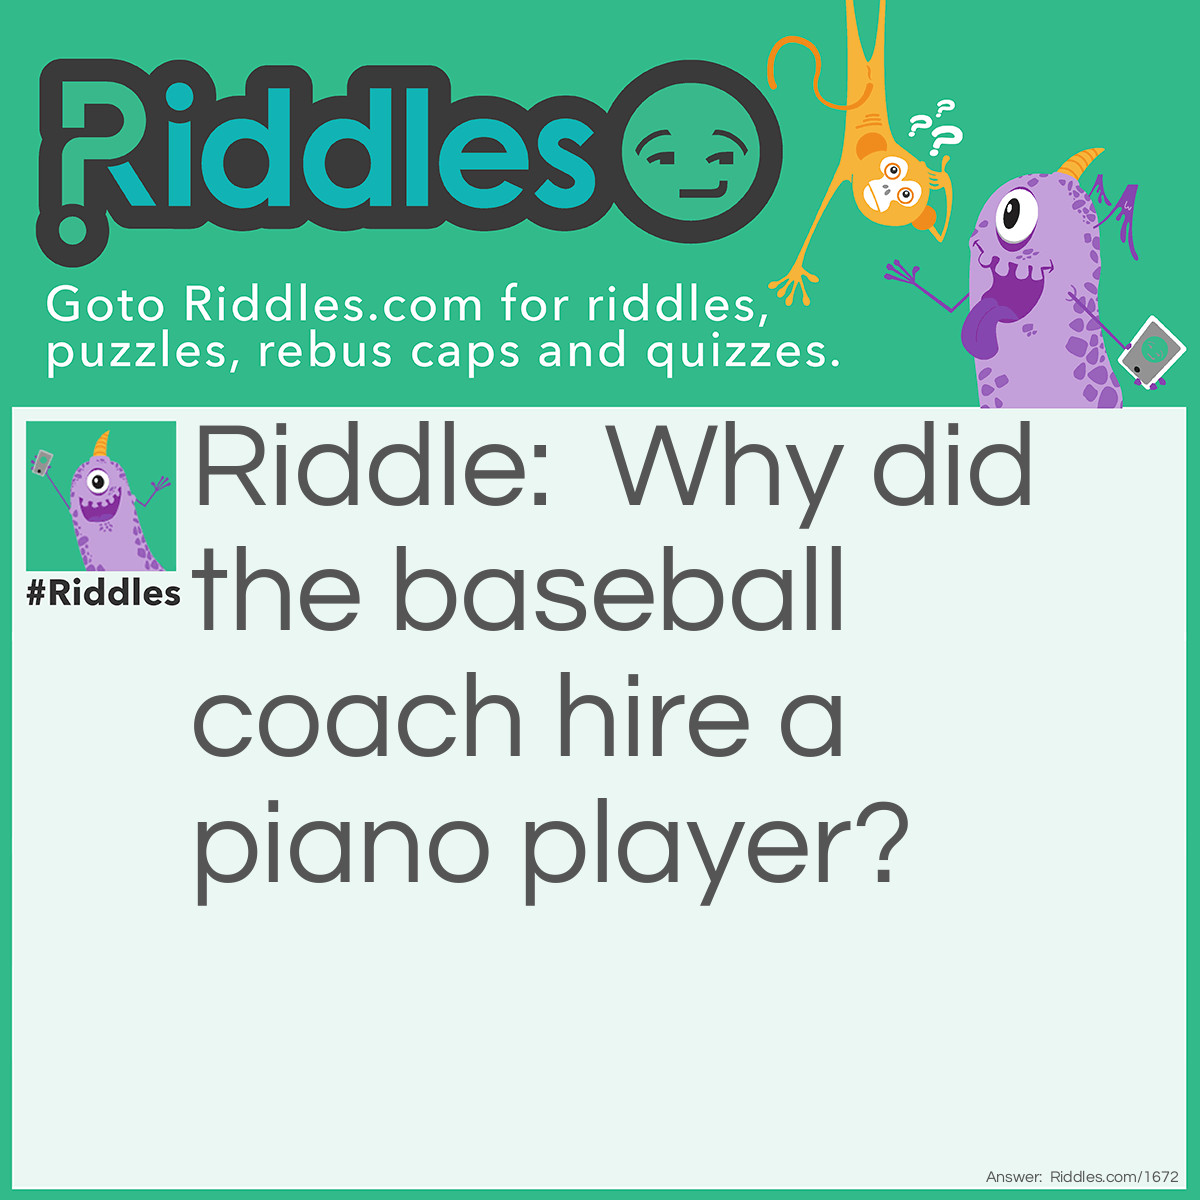 Why did the baseball coach hire a piano player riddle meme